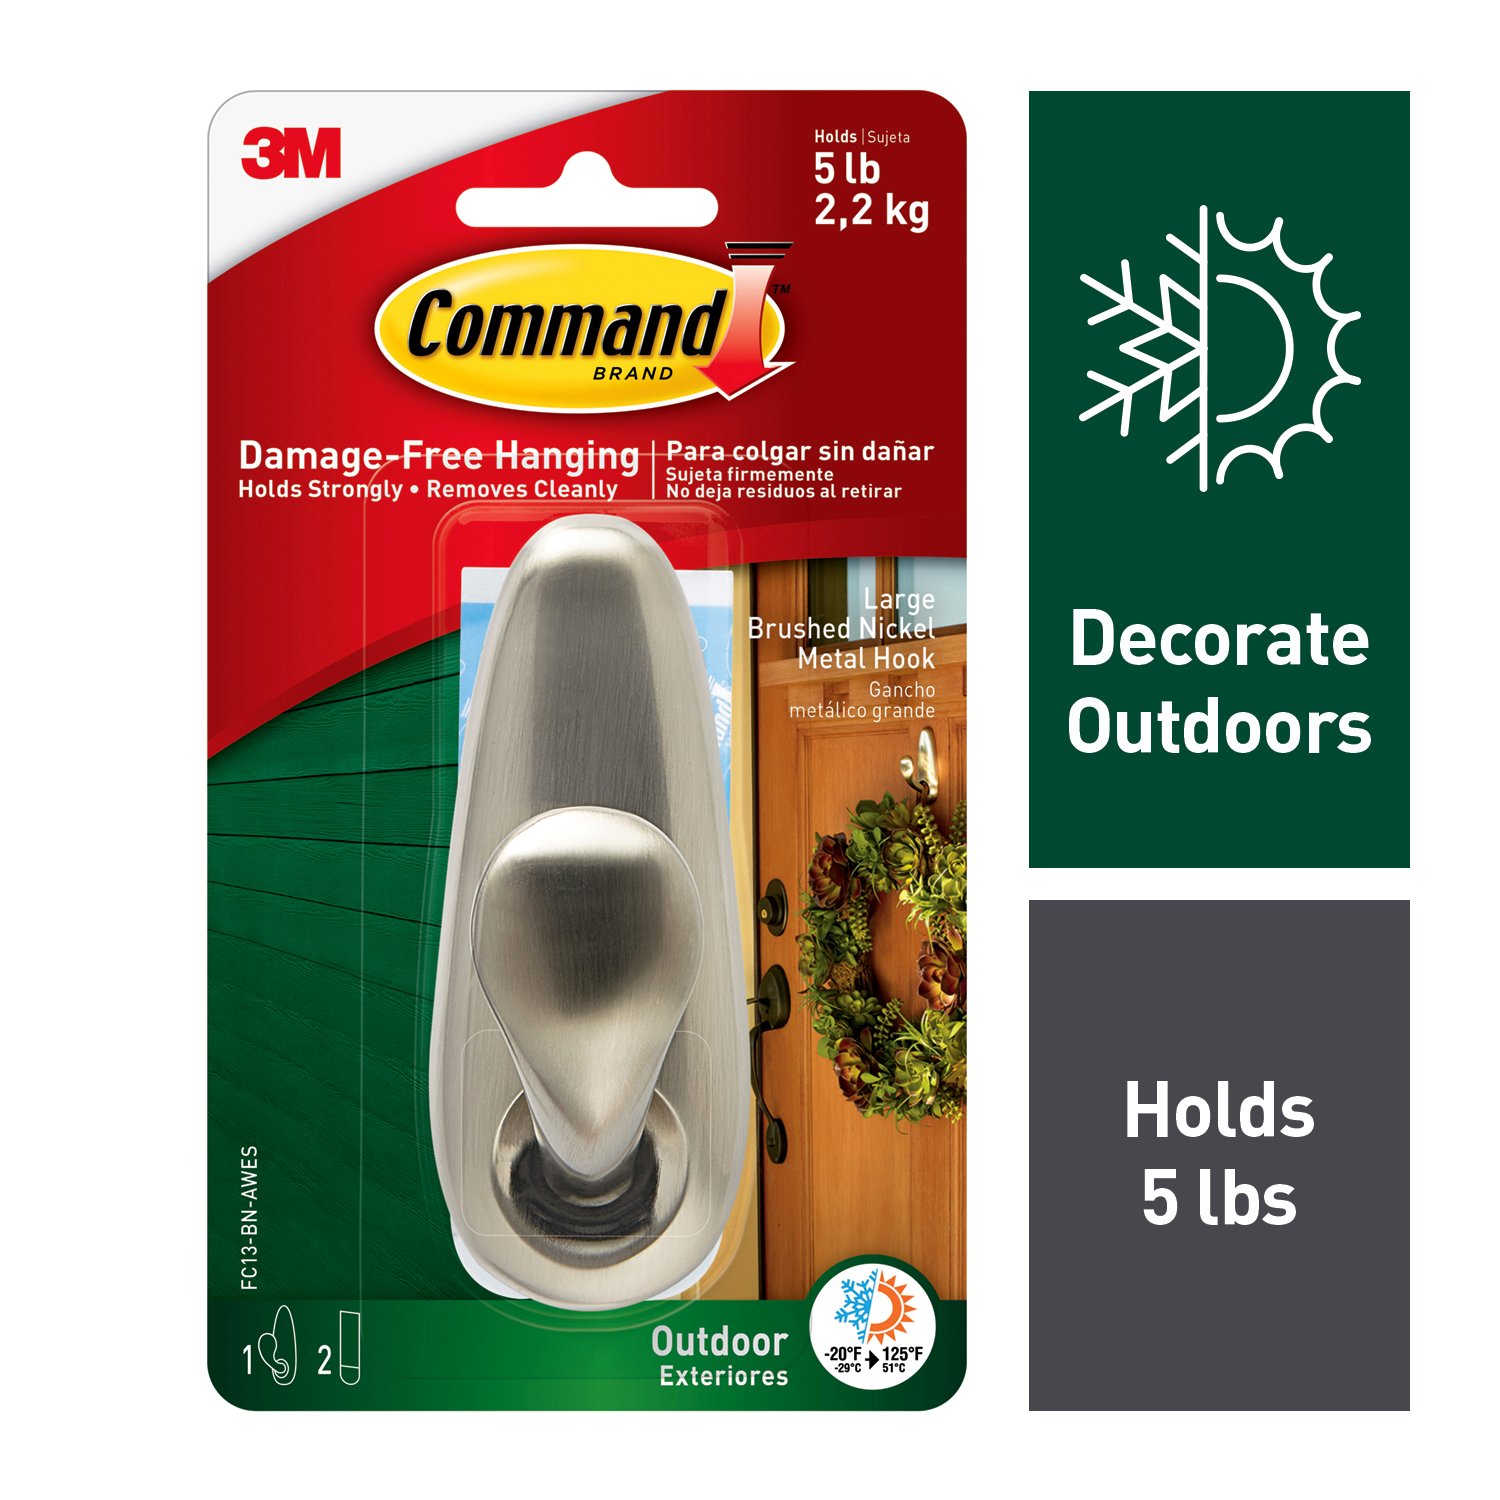 7010290665 - Command Outdoor Forever Classic Large Metal Hook with Foam Strips Bulk
for Display FC13-BN-AWESBU